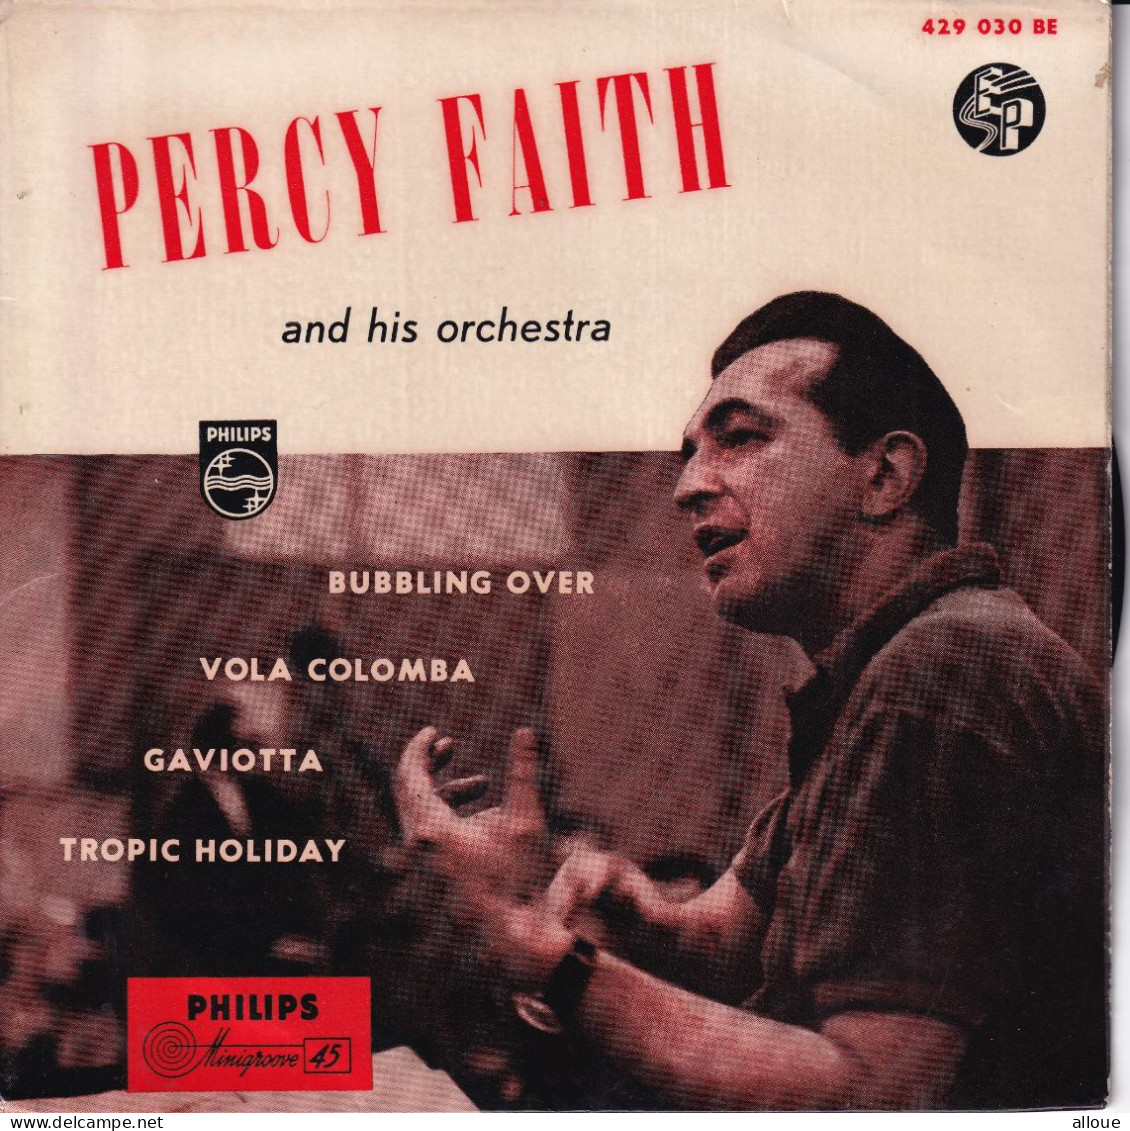 PERCY FAITH - HL EP - DUBBLING OVER + 3 - Instrumentaal